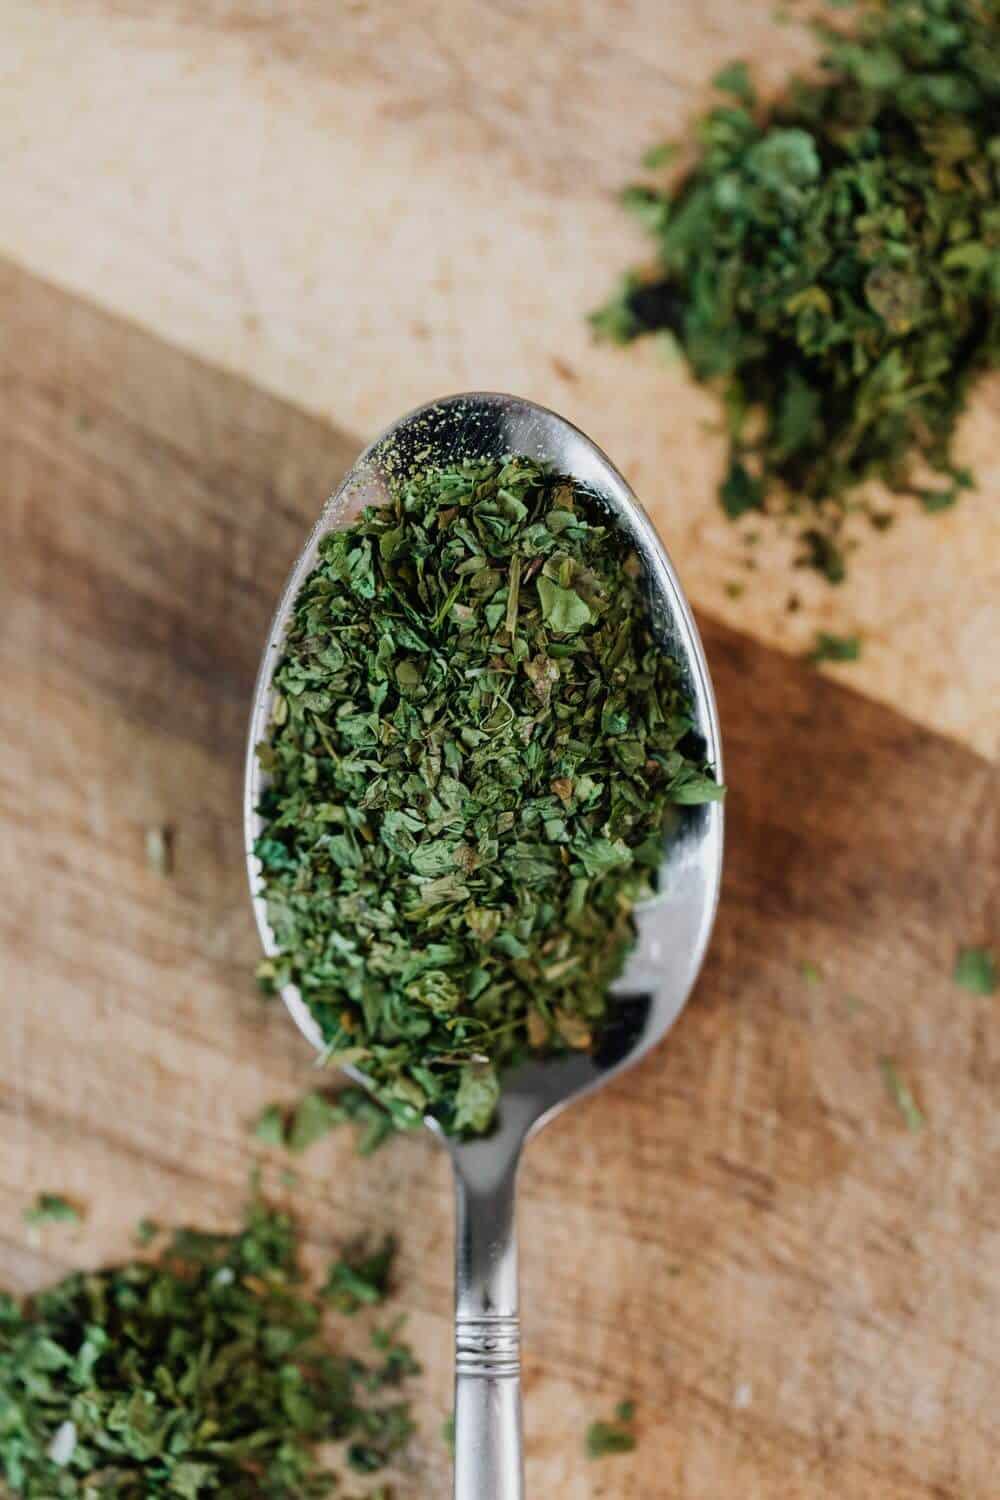 Grinded oregano in a spoon